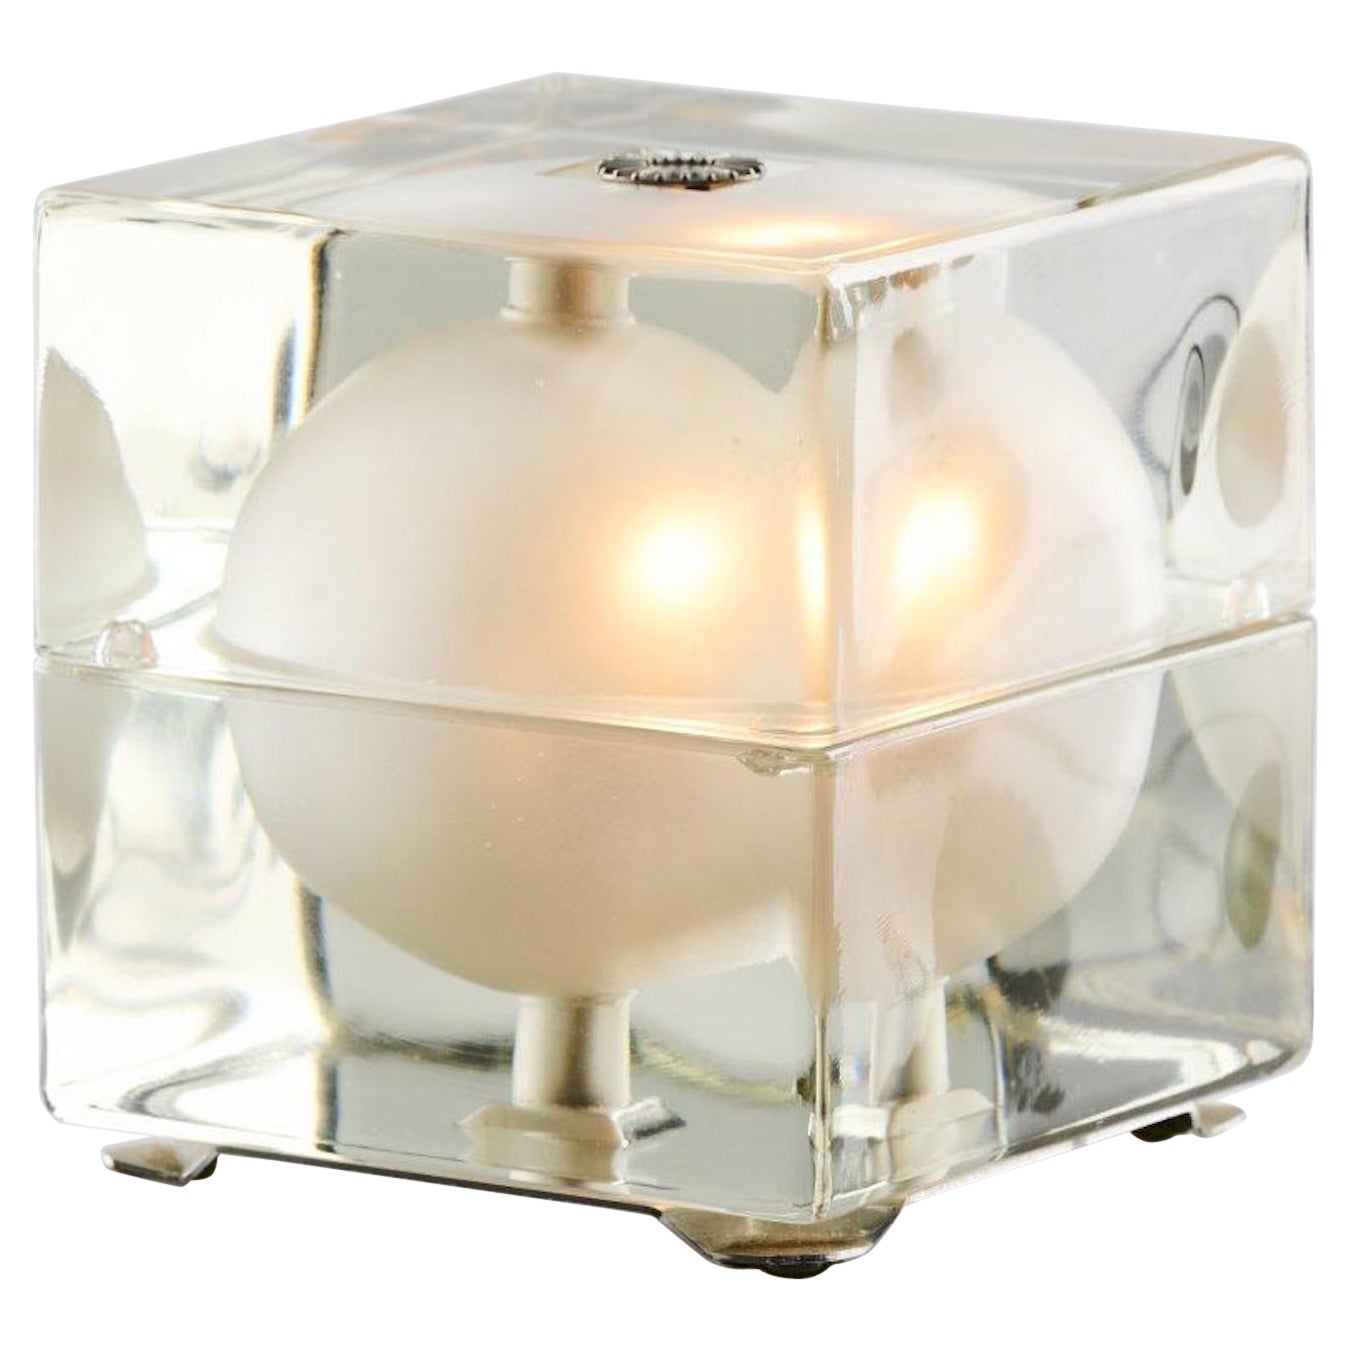 Table Lamp “Cubosfera” (Cubic Sphere) by Alessandro Mendini, 1968 For Sale